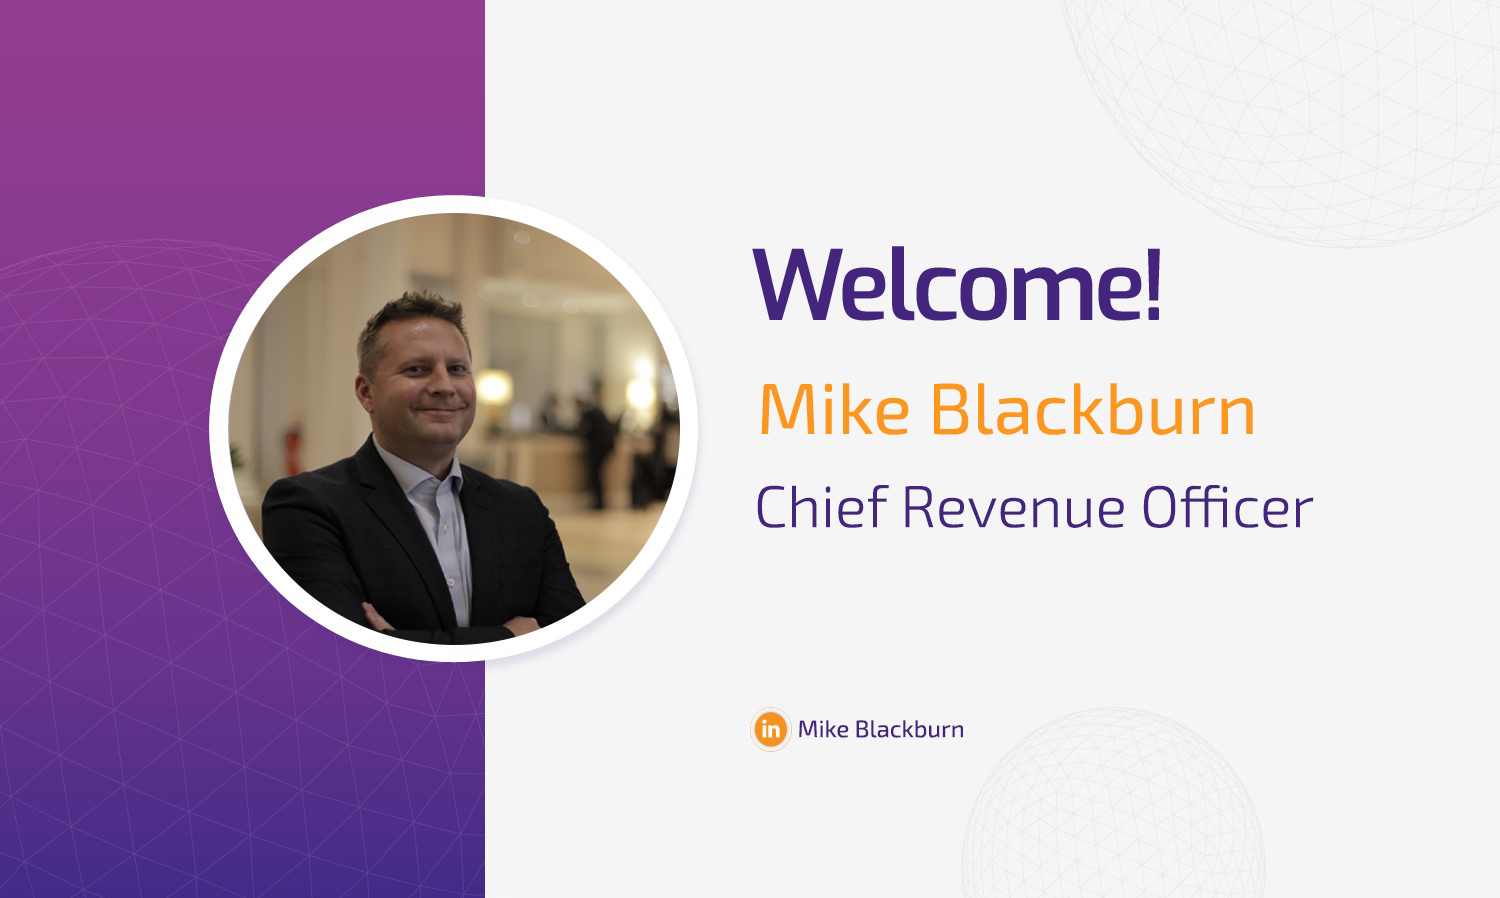 Mike Blackburn joins Totalmobile as Chief Revenue Officer